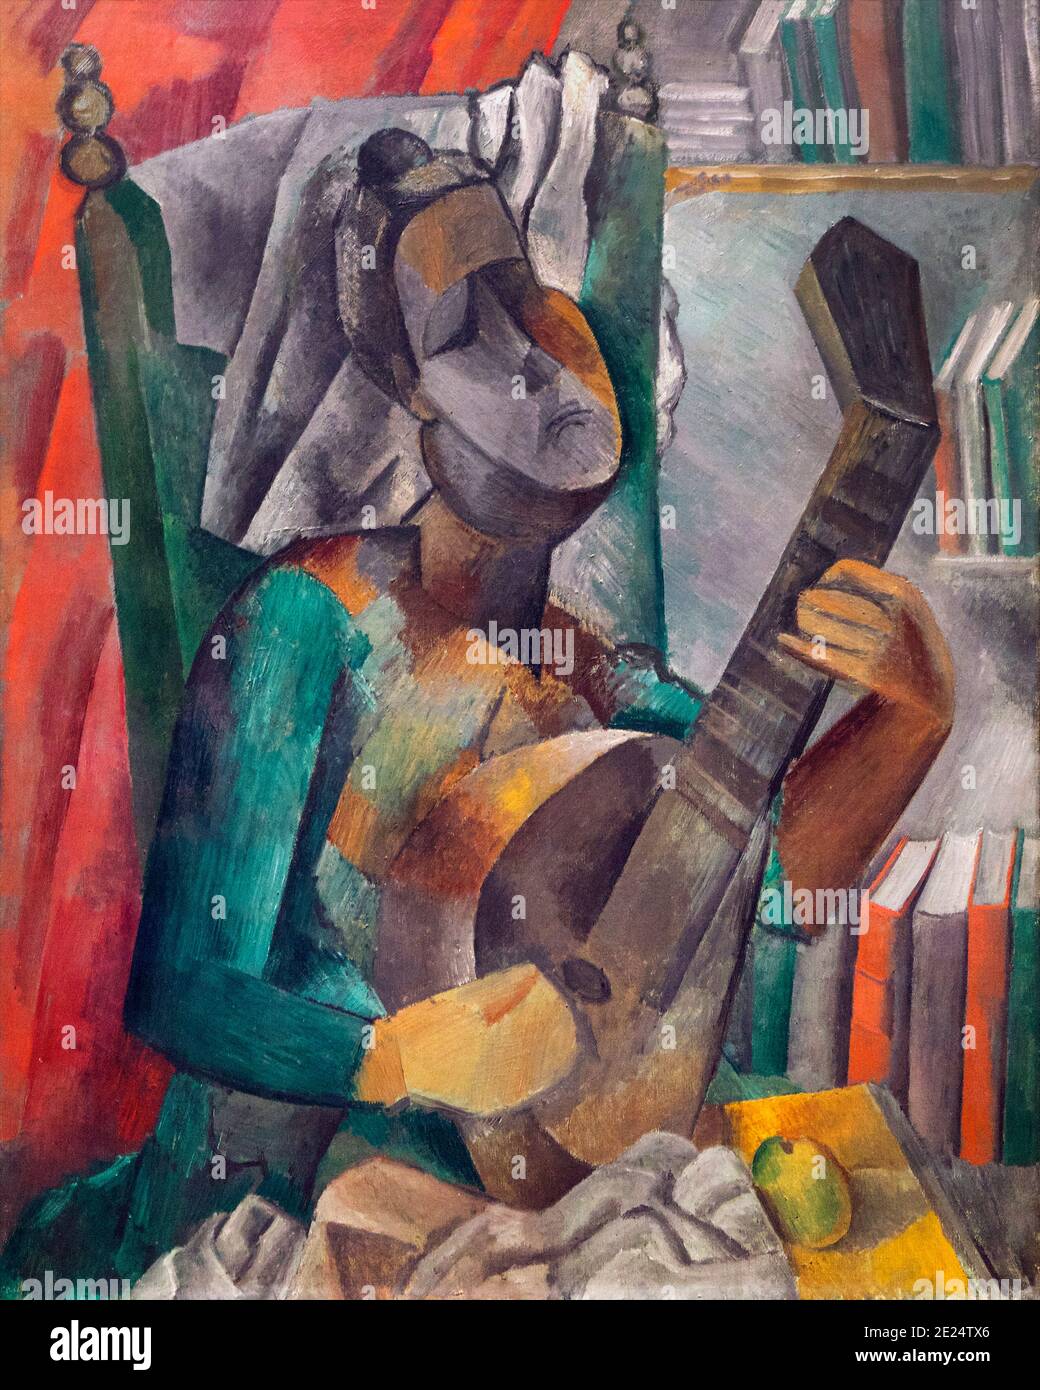 Woman with a Mandolin, Pablo Picasso, 1909, State Hermitage Museum, Saint Petersburg, Russia Stock Photo